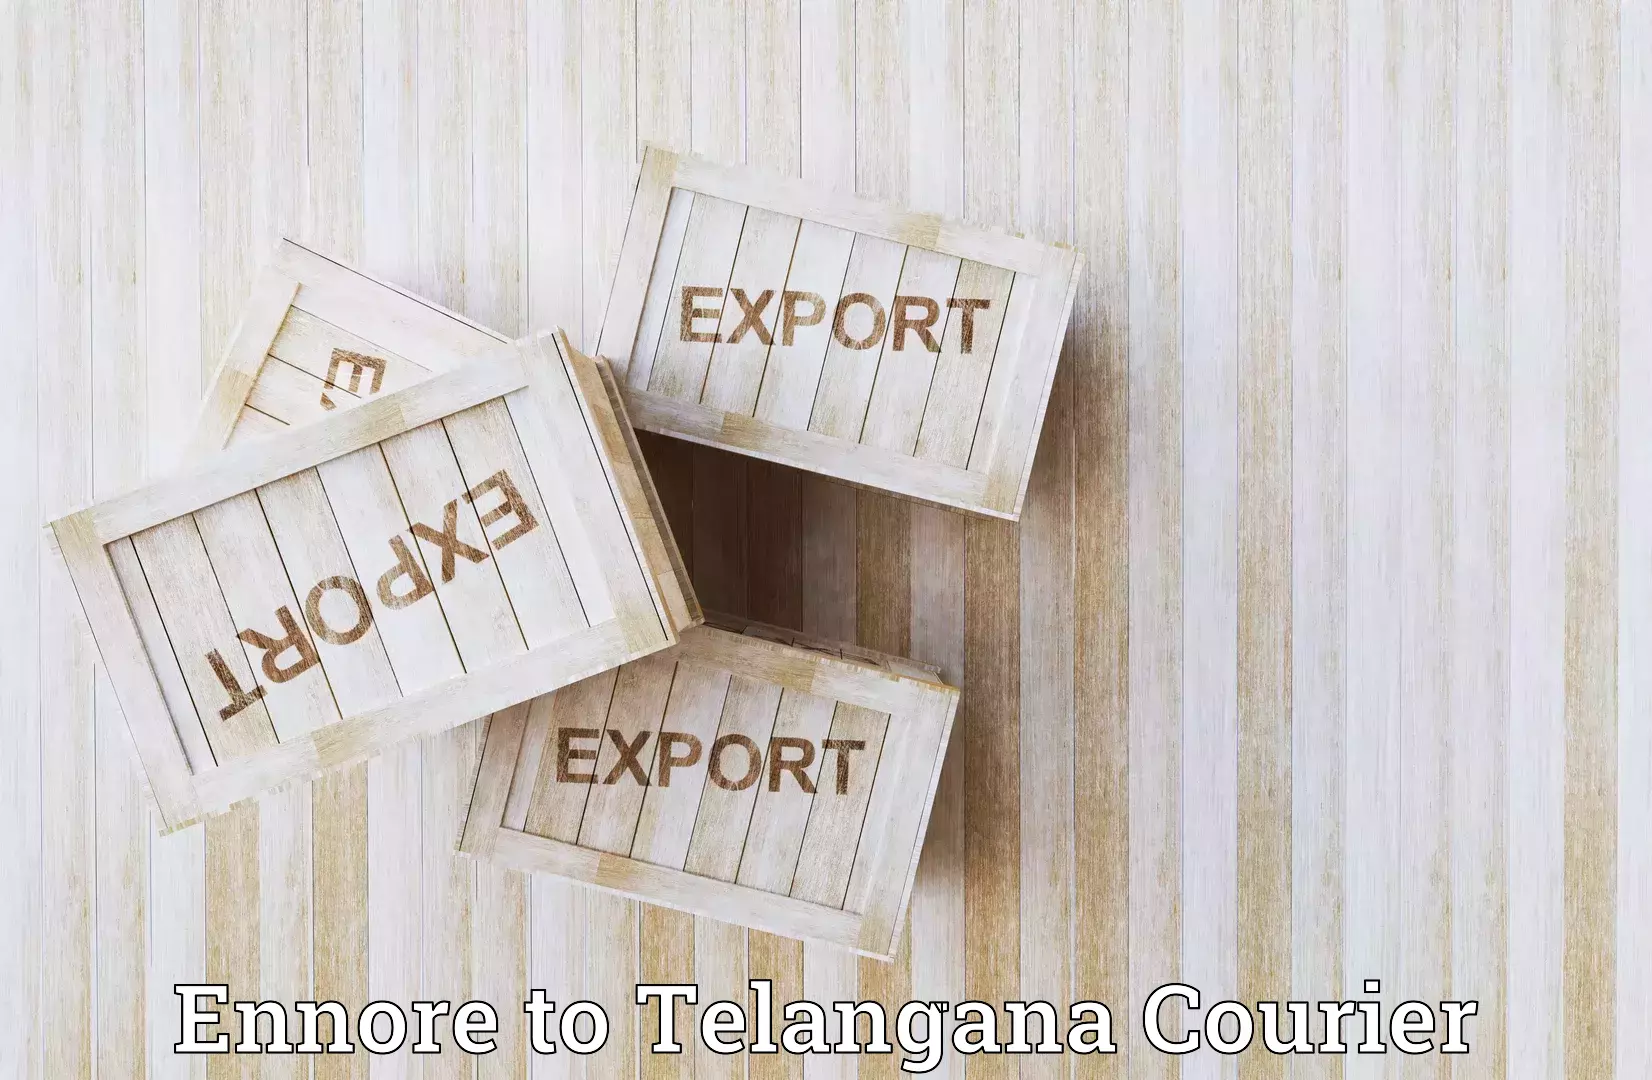 Next day courier Ennore to Telangana